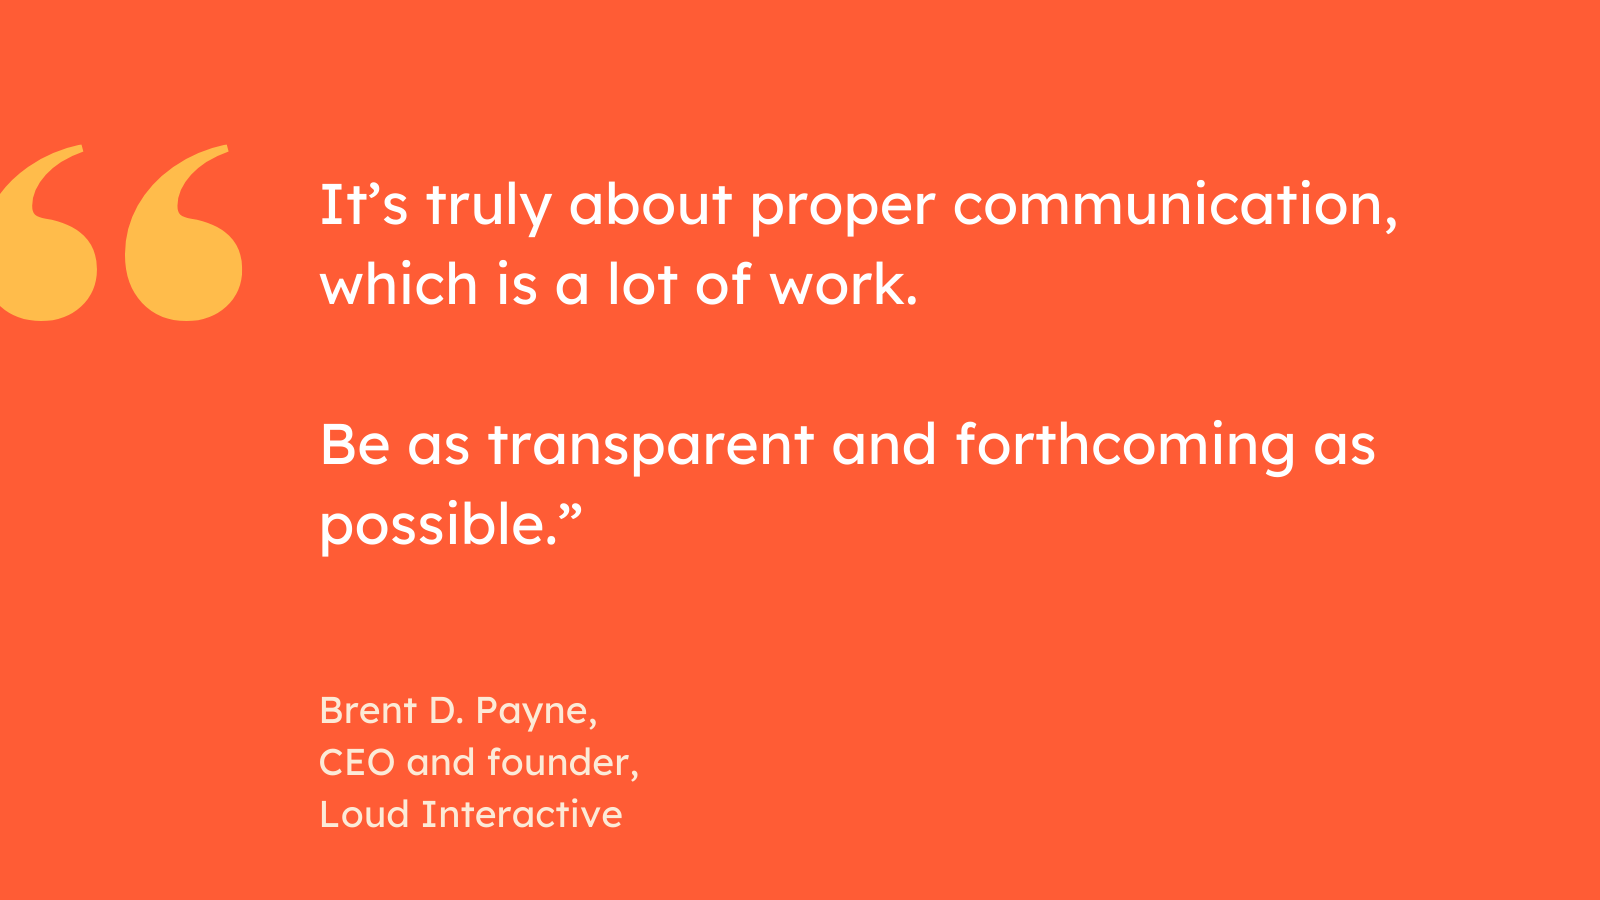 “It’s truly about proper communication, which is a lot of work. Be as transparent and forthcoming as possible.” Brent D. Payne, CEO and founder, Loud Interactive